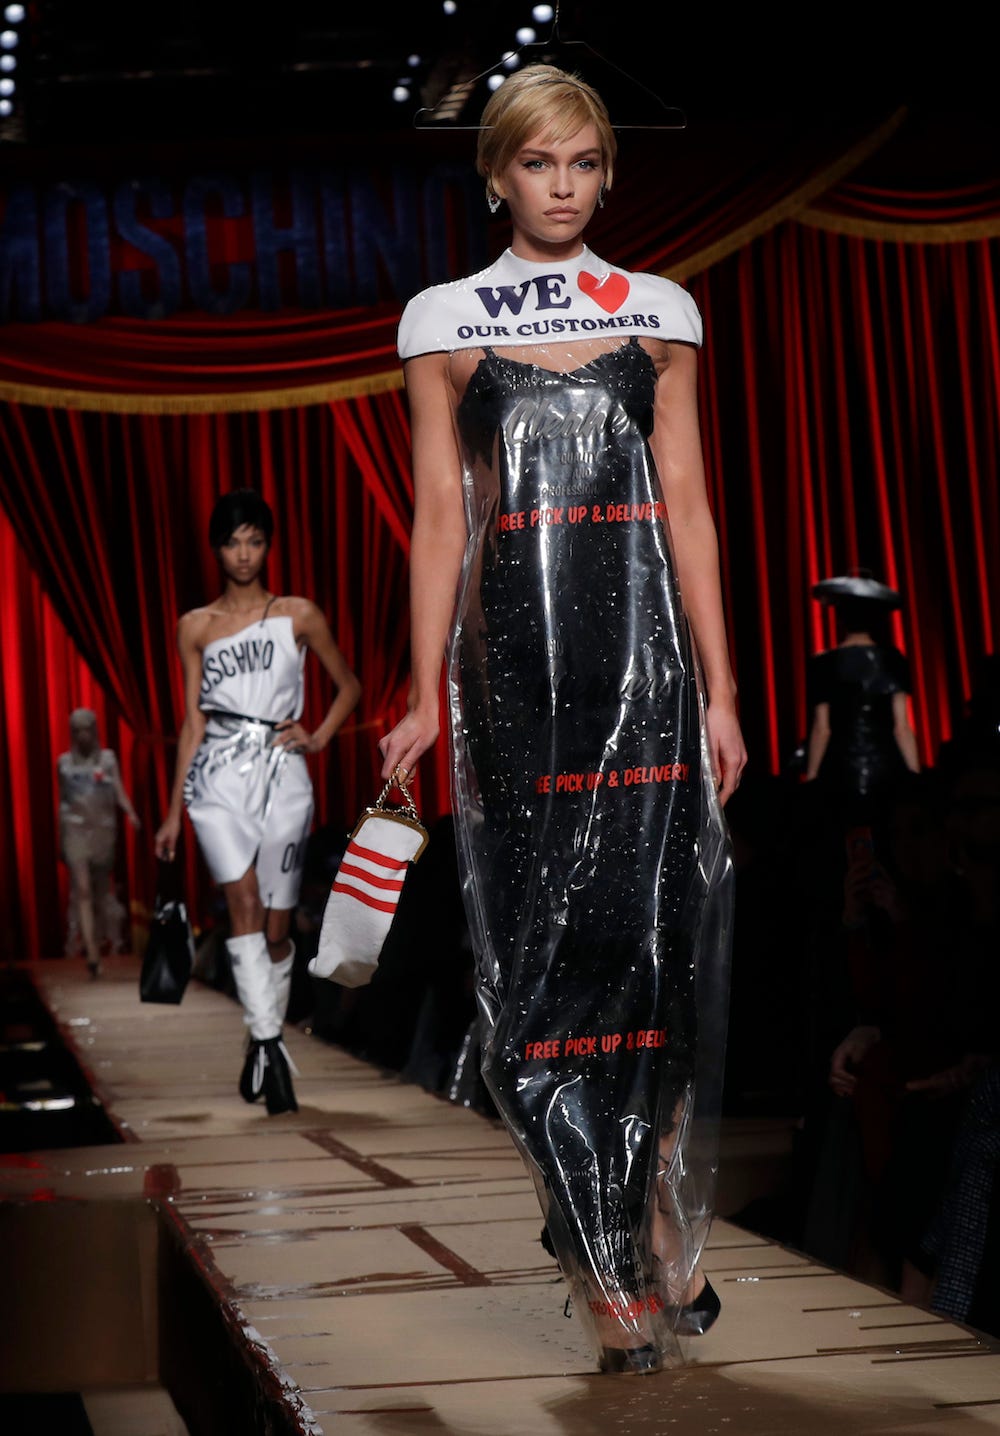 Moschino Is Selling a $900 'Dry Cleaning Bag' Dress